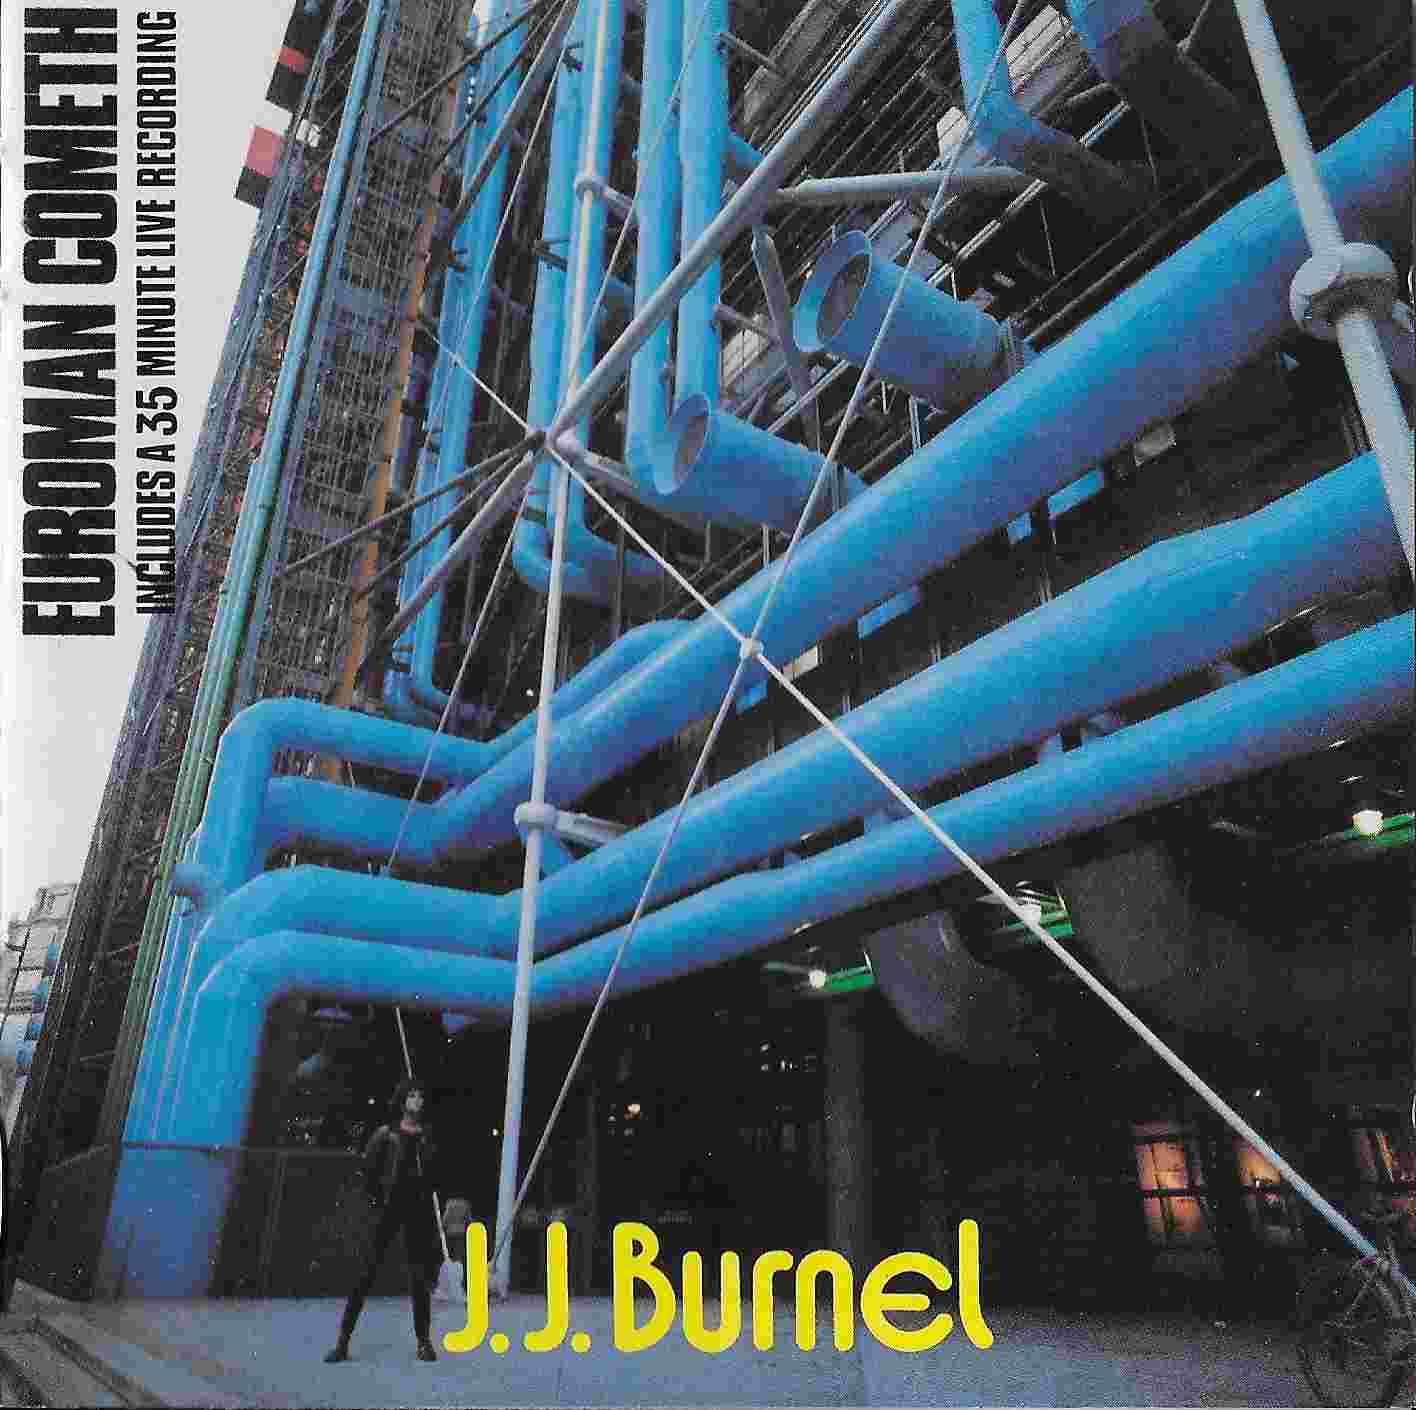 Picture of 798535 2 The Euroman cometh  by artist Jean Jacques Burnel from The Stranglers cds